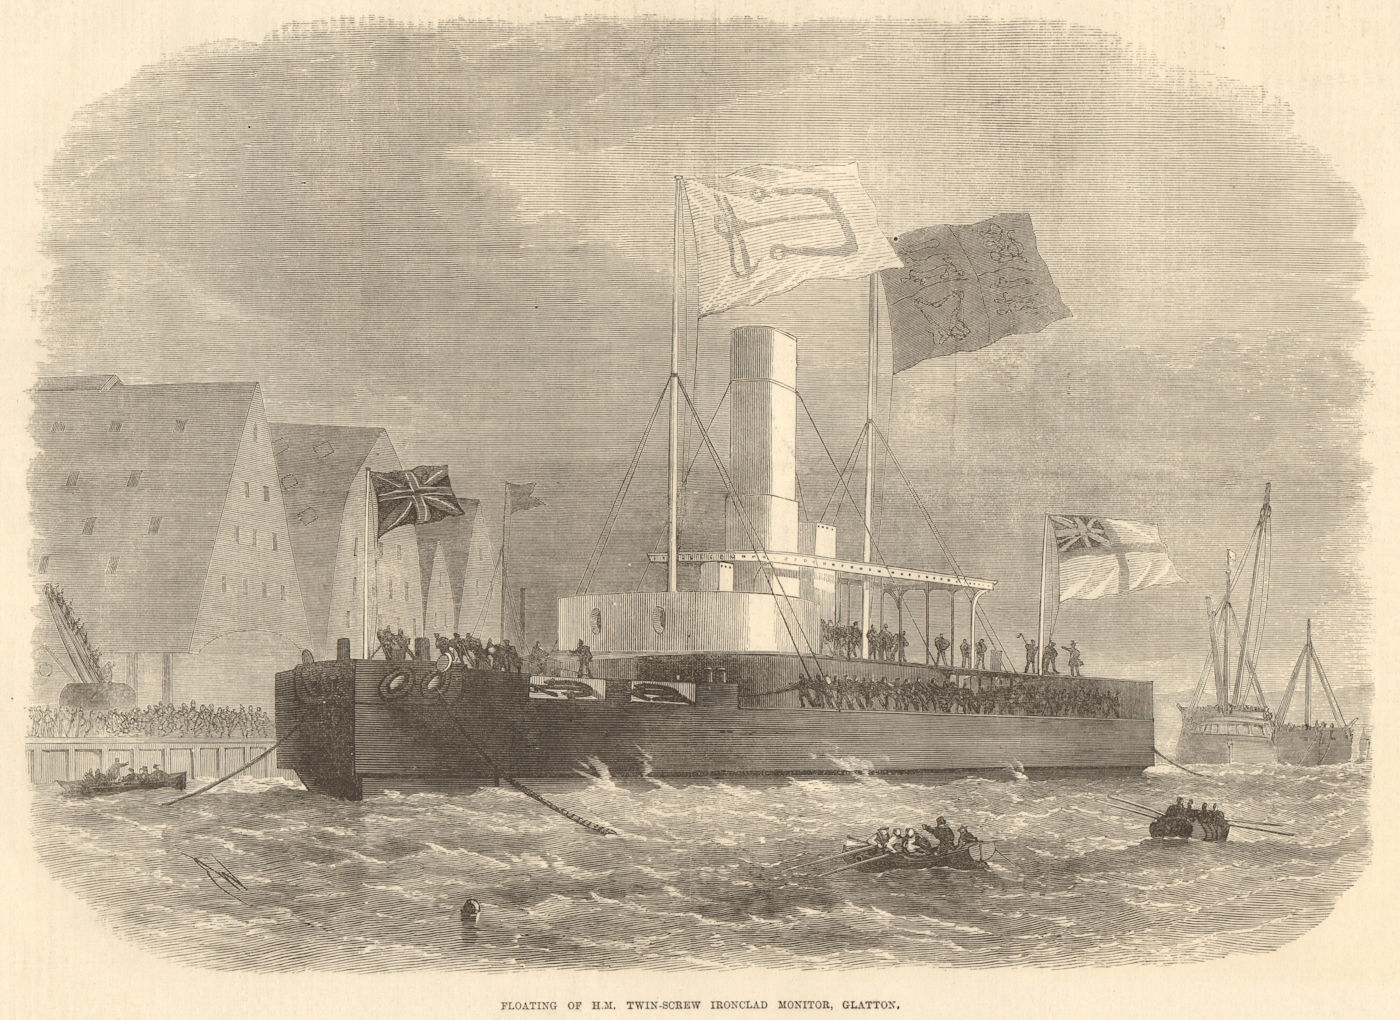 Associate Product Floating of H. M. twin-screw iron-clad monitor, Glatton. Chatham. Ships 1871